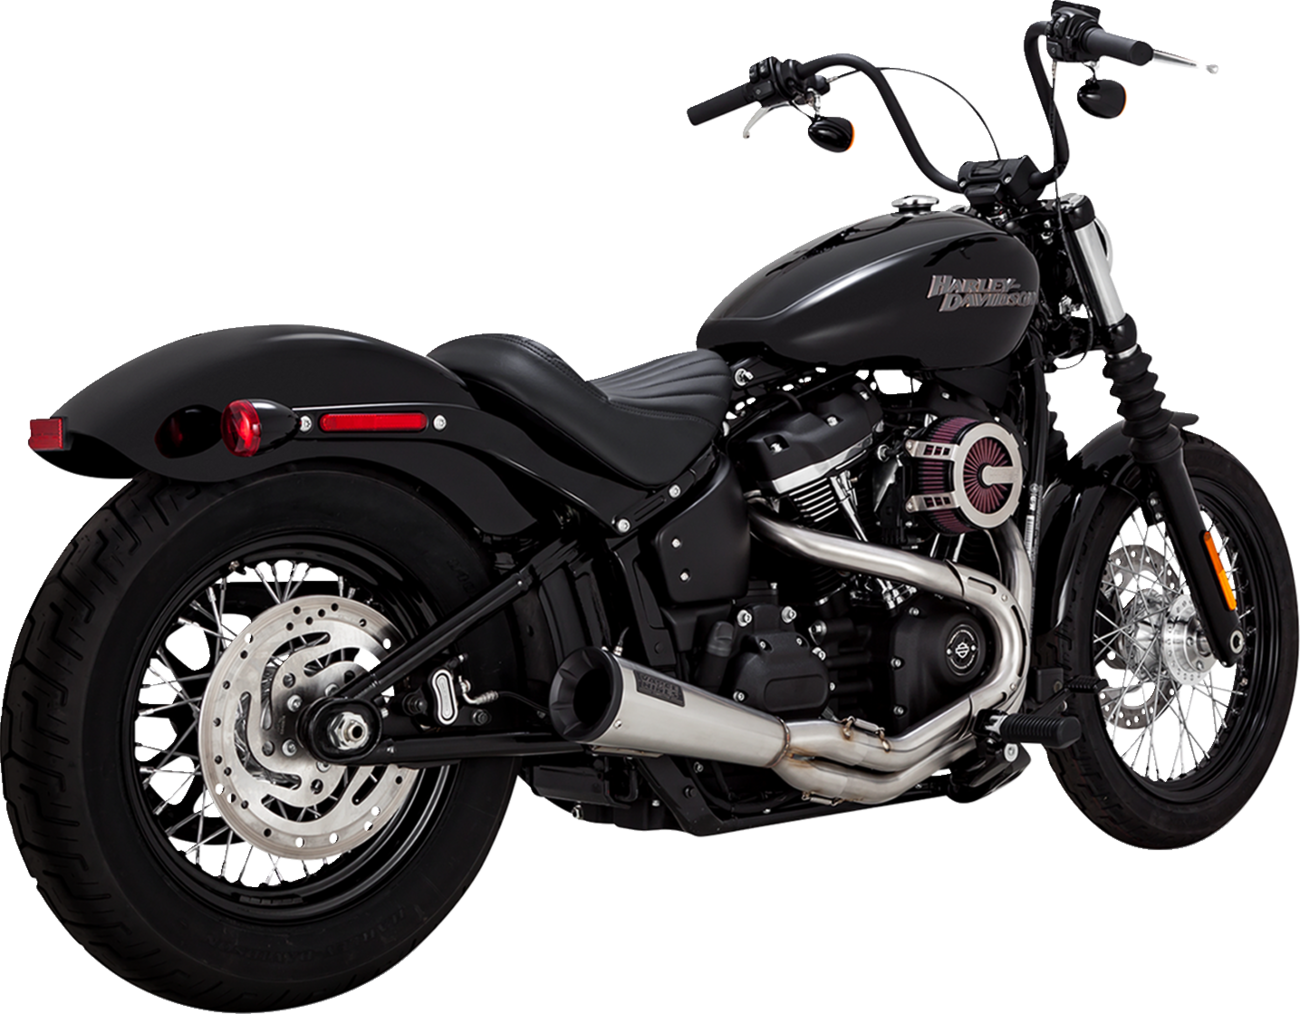 Vance & Hines 2-1 Upsweep Brushed Exhaust for 2018-2023 Harley Softail Models